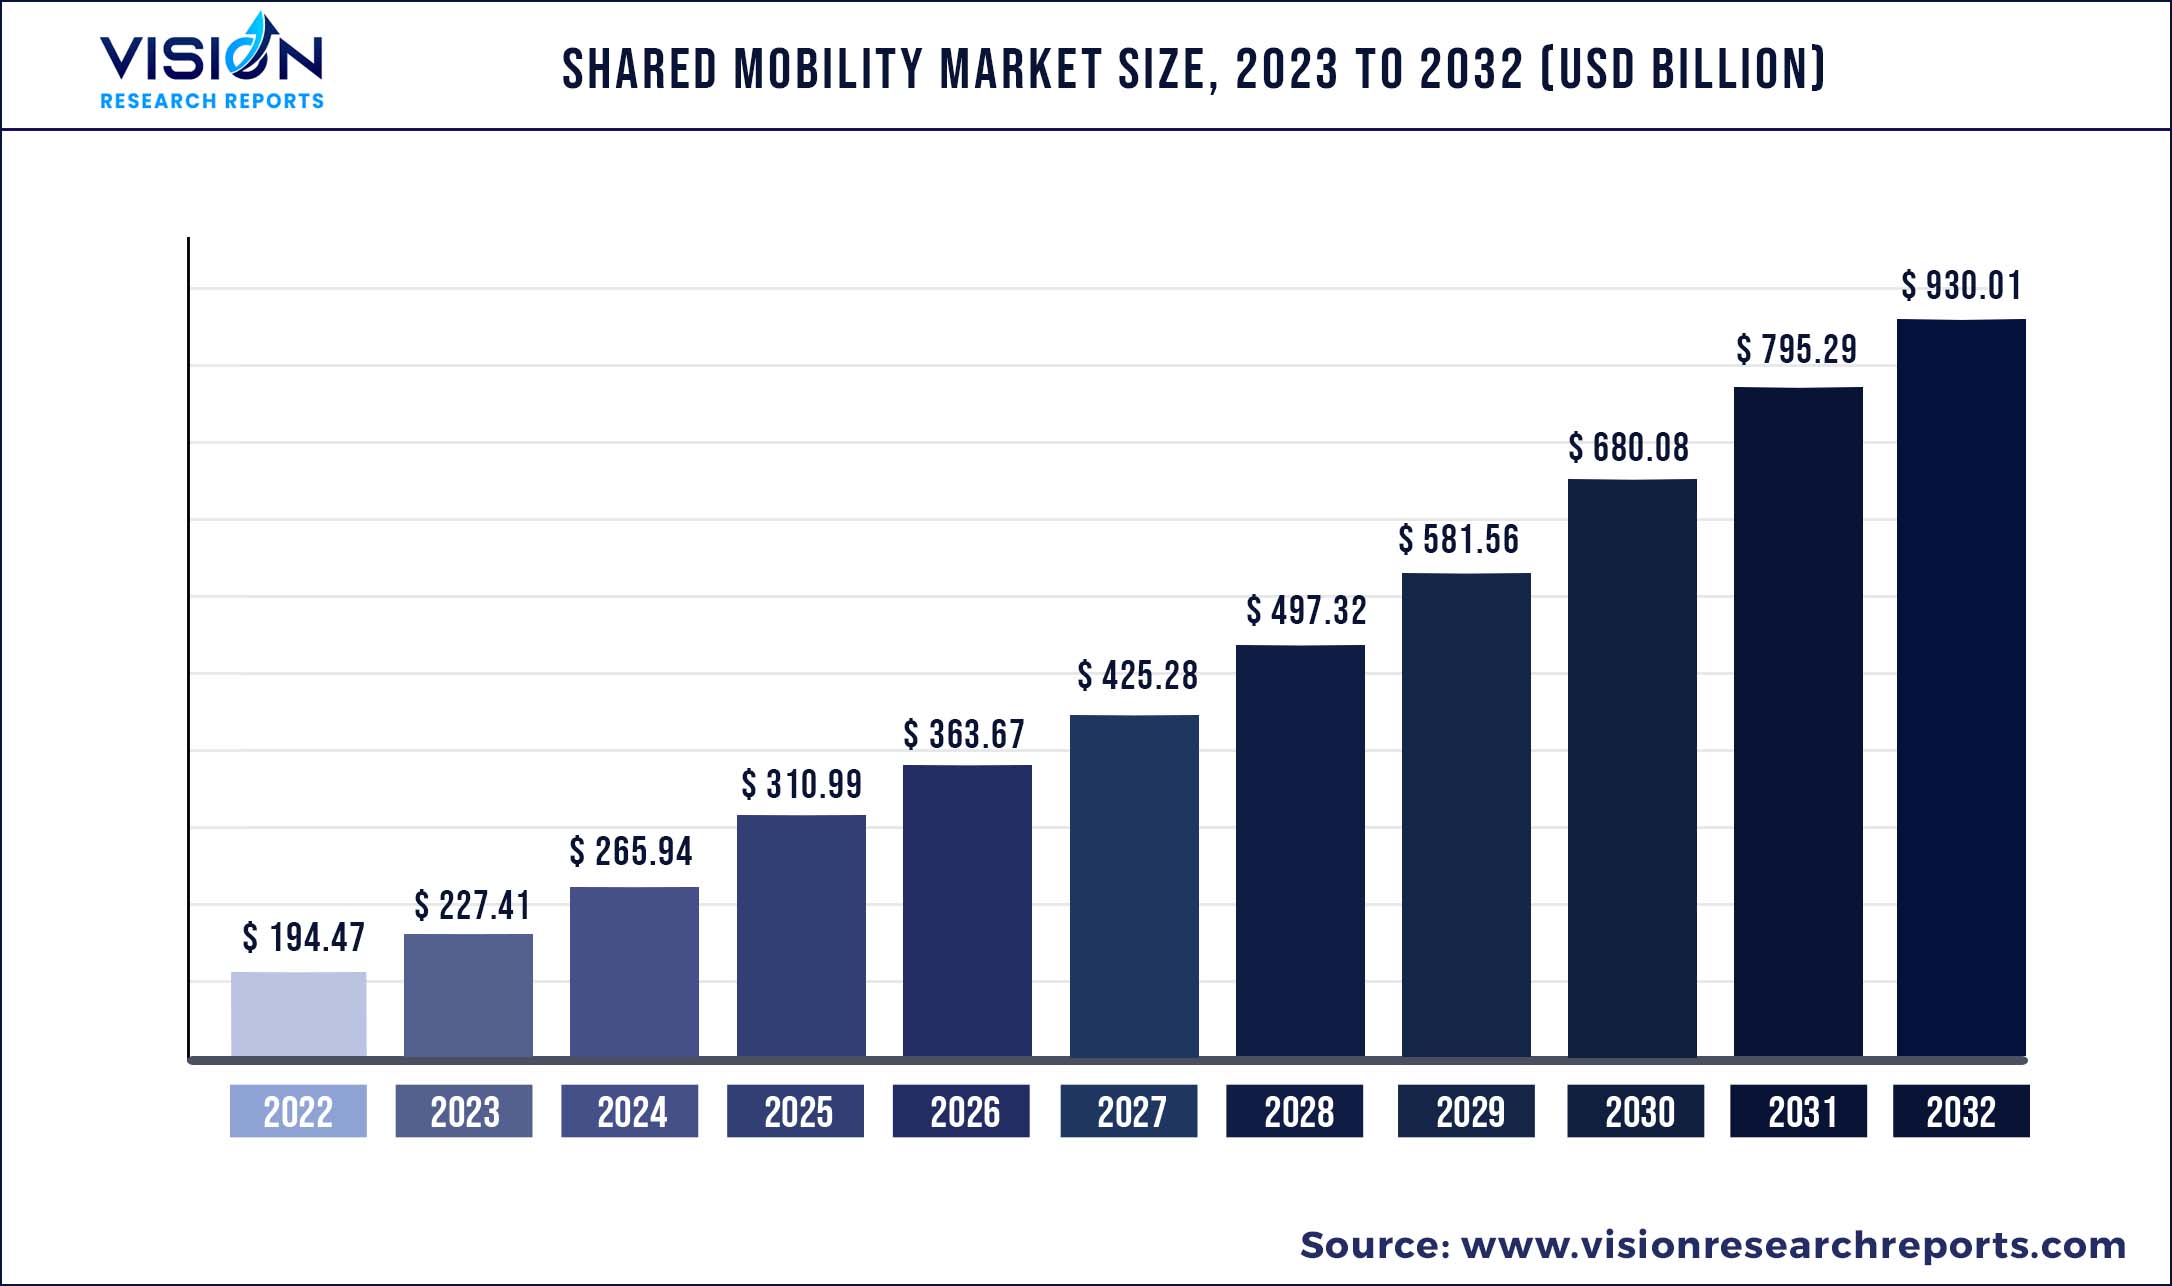 Shared Mobility Market Size 2023 to 2032